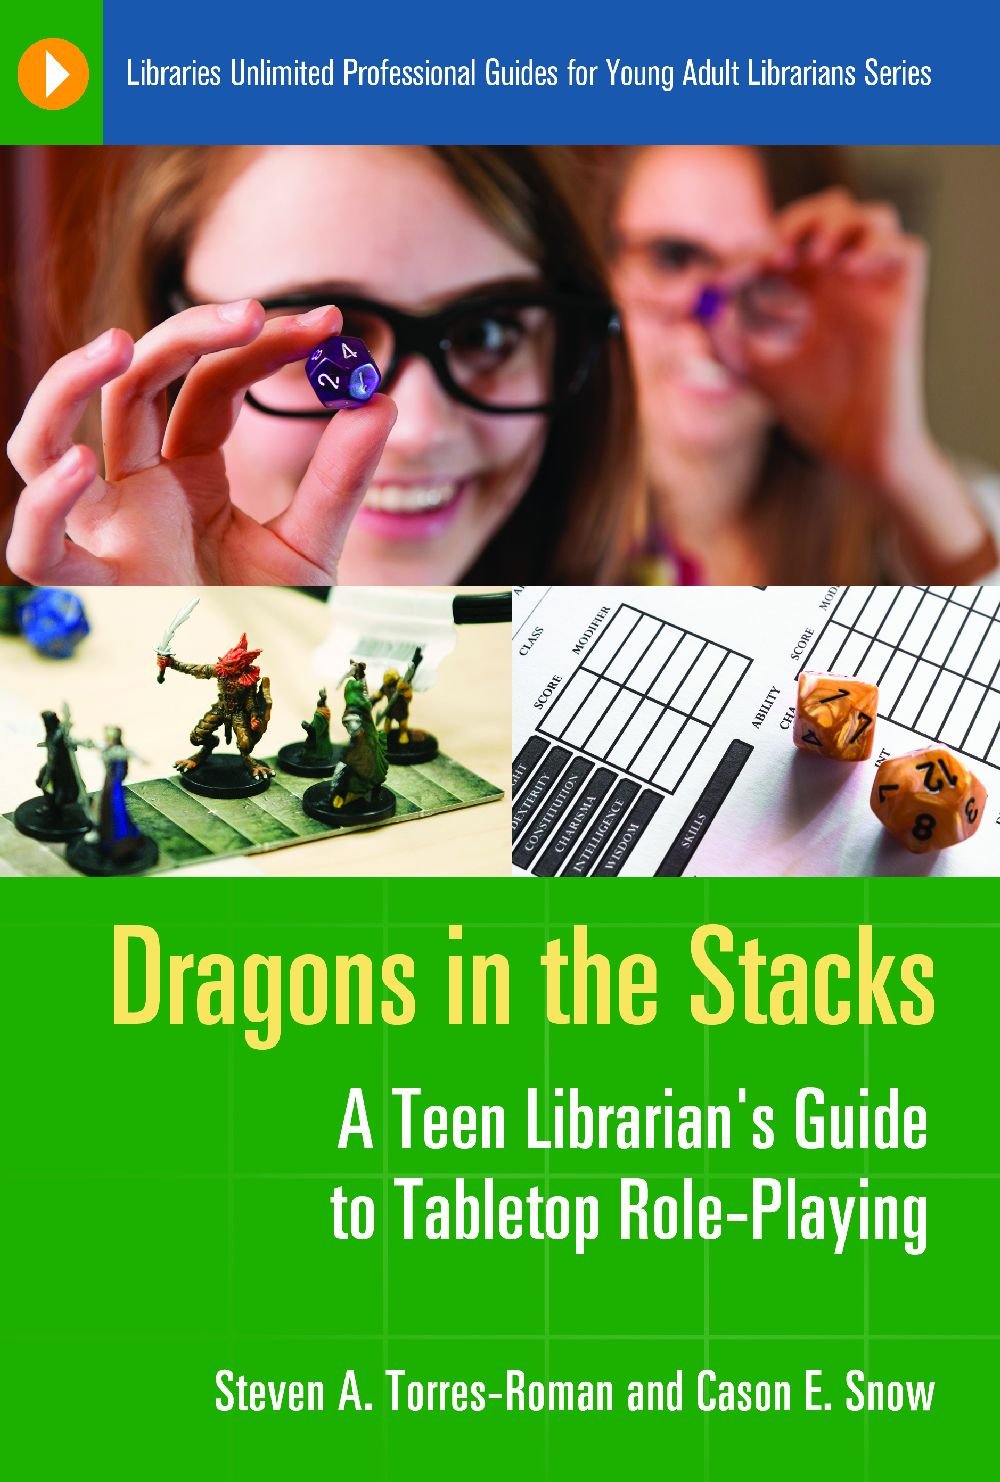 “Dragons in the Stacks: A Teen Librarian’s Guide to Tabletop RPGs” covers Onyx Path games